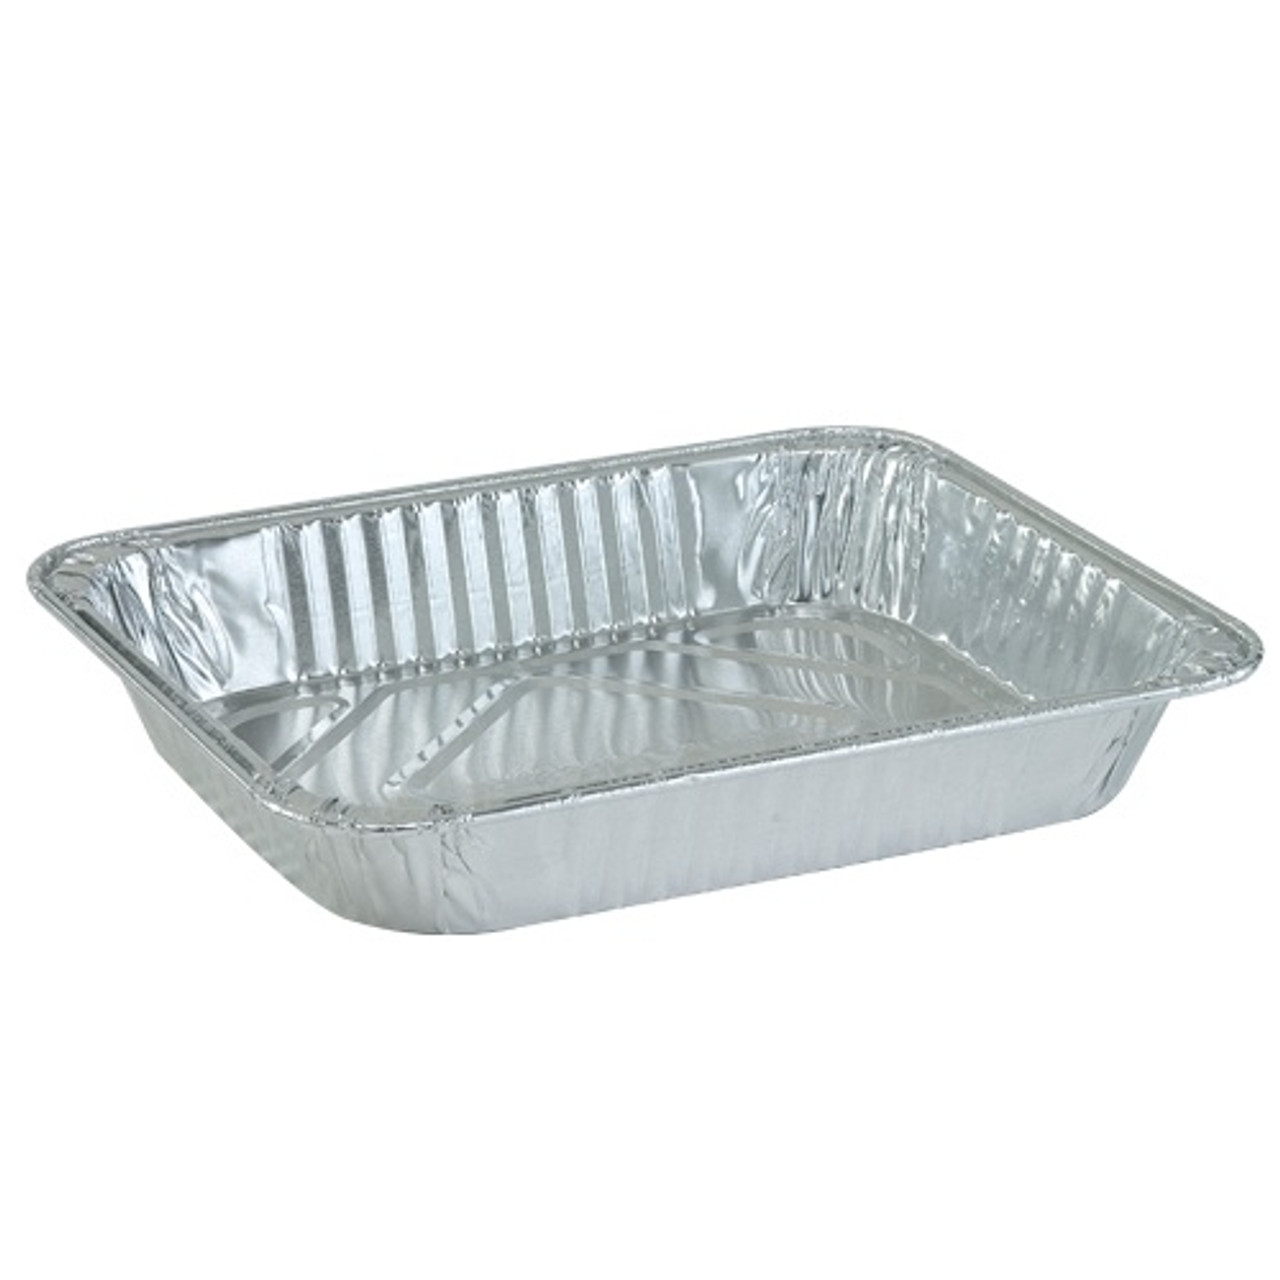 https://cdn11.bigcommerce.com/s-hgqmwywp99/images/stencil/1280x1280/products/49290/44081/9-x-13-lasagna-aluminum-baking-pans-100ct-4__19929.1675880316.jpg?c=1?imbypass=on